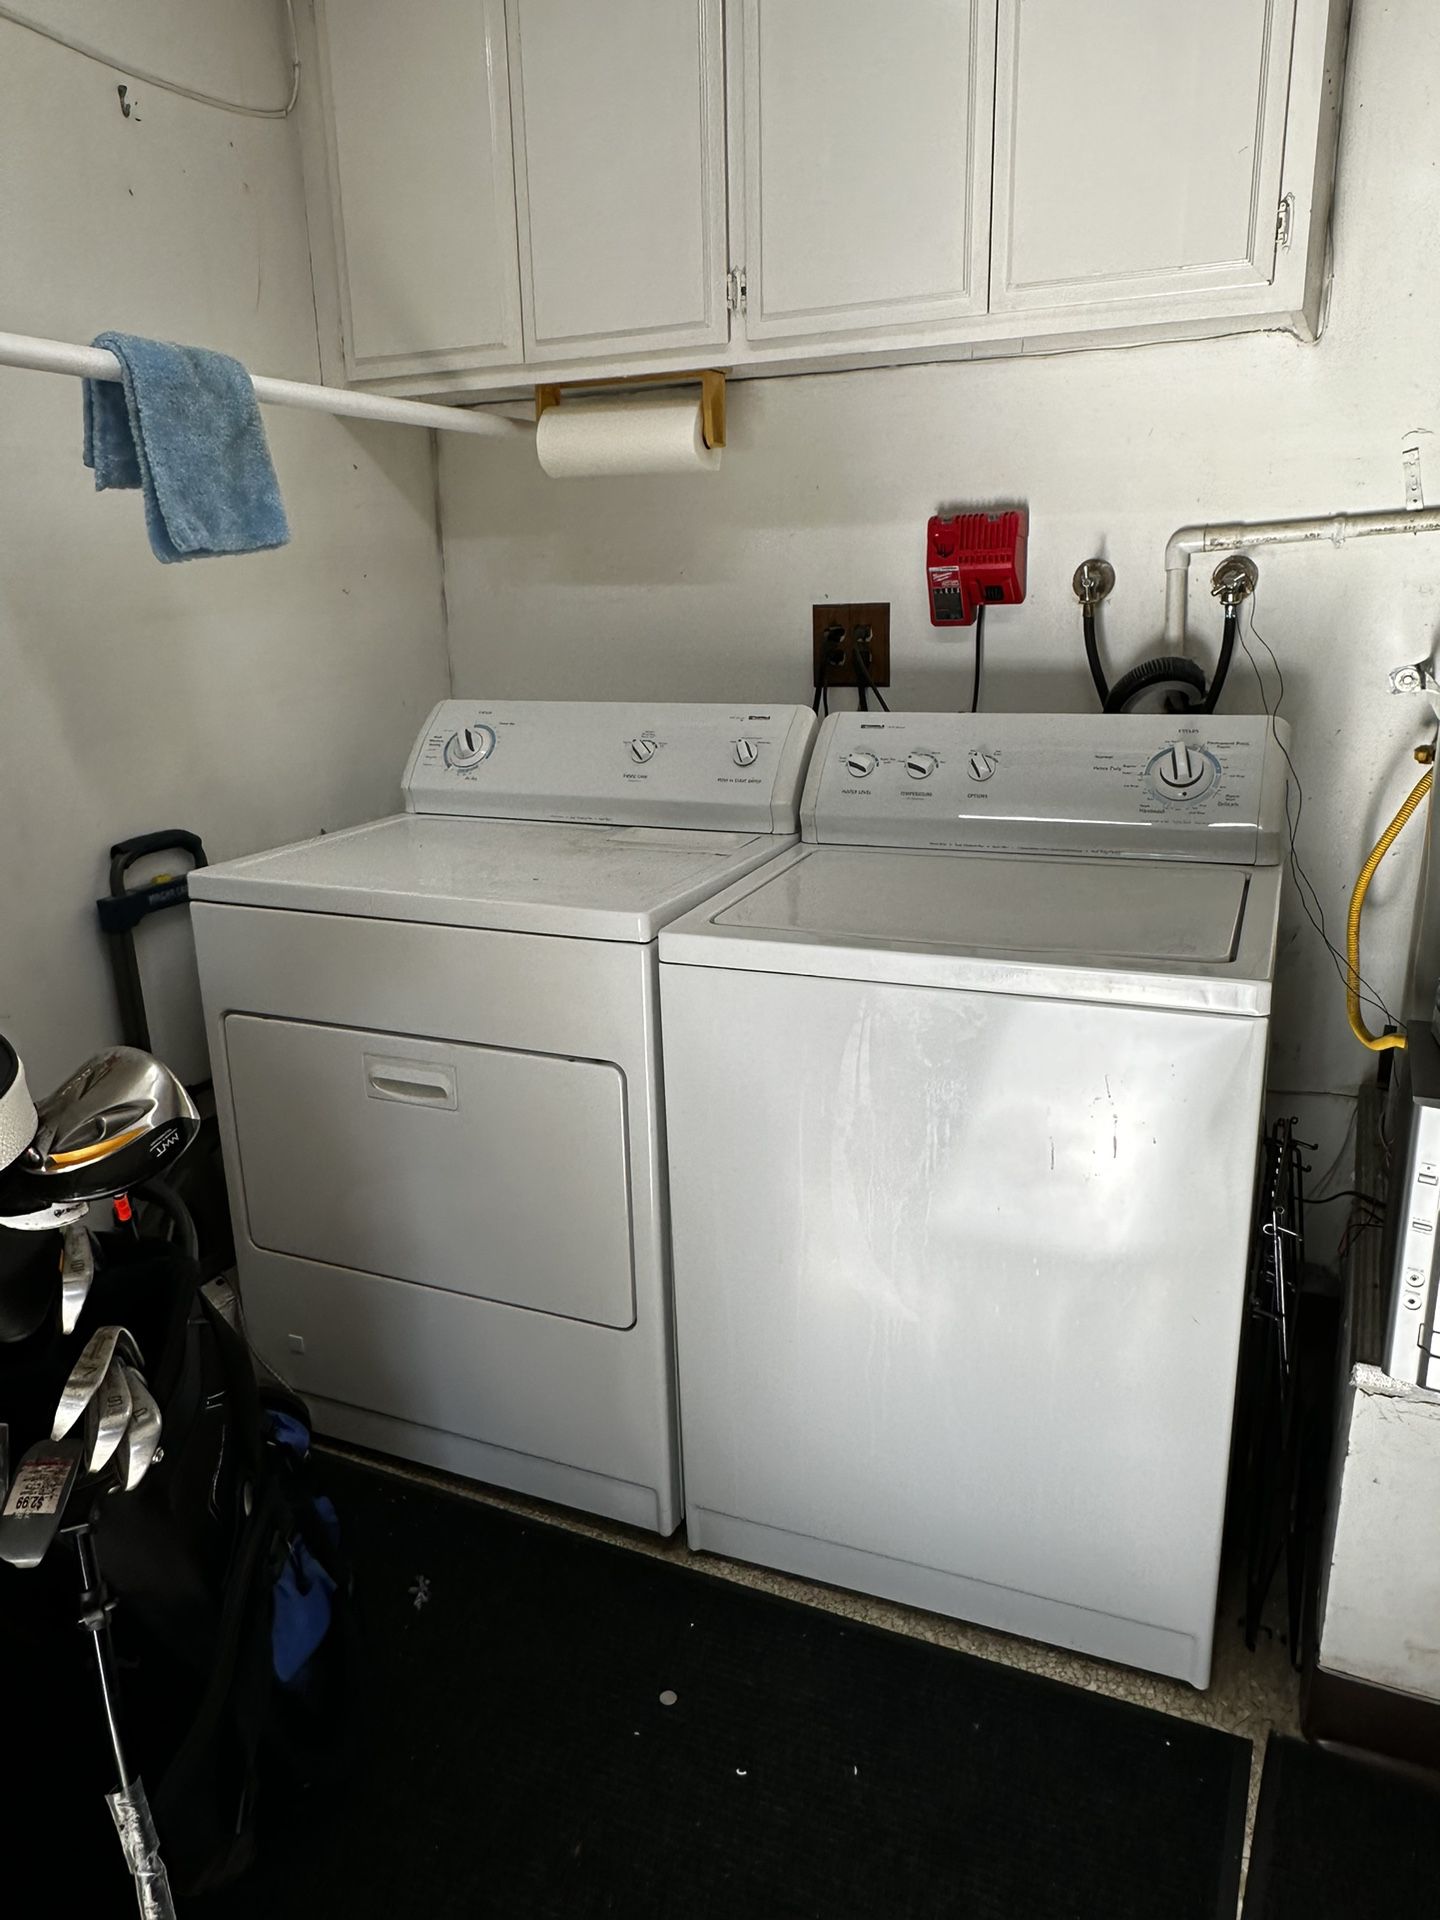 KENMORE WASHER AND DRYER 